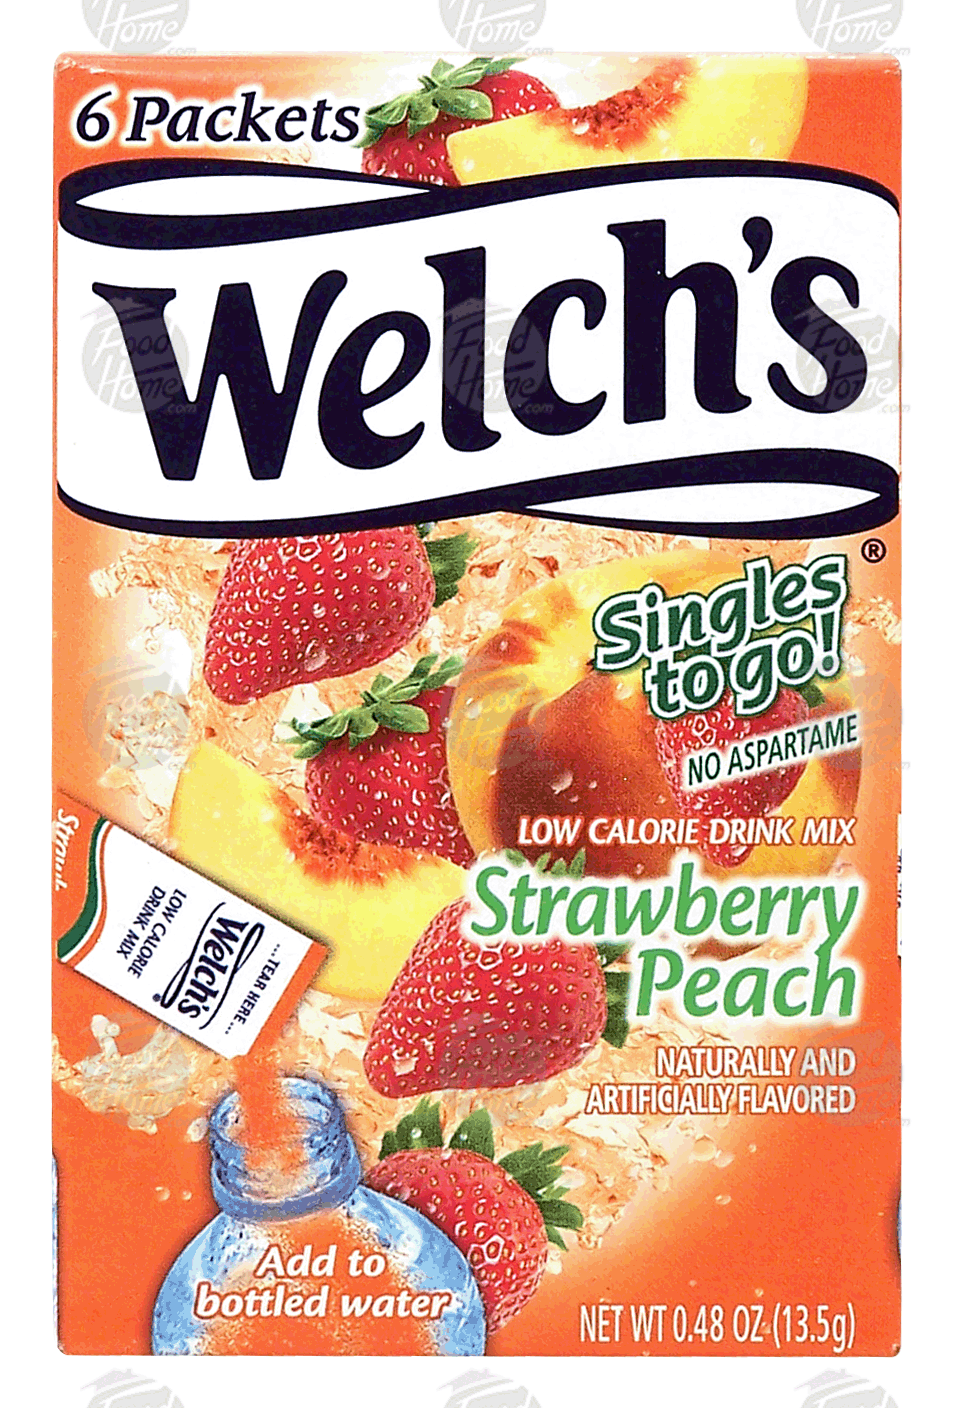 Groceries-Express.com Product Infomation for Welch's Singles to go ...